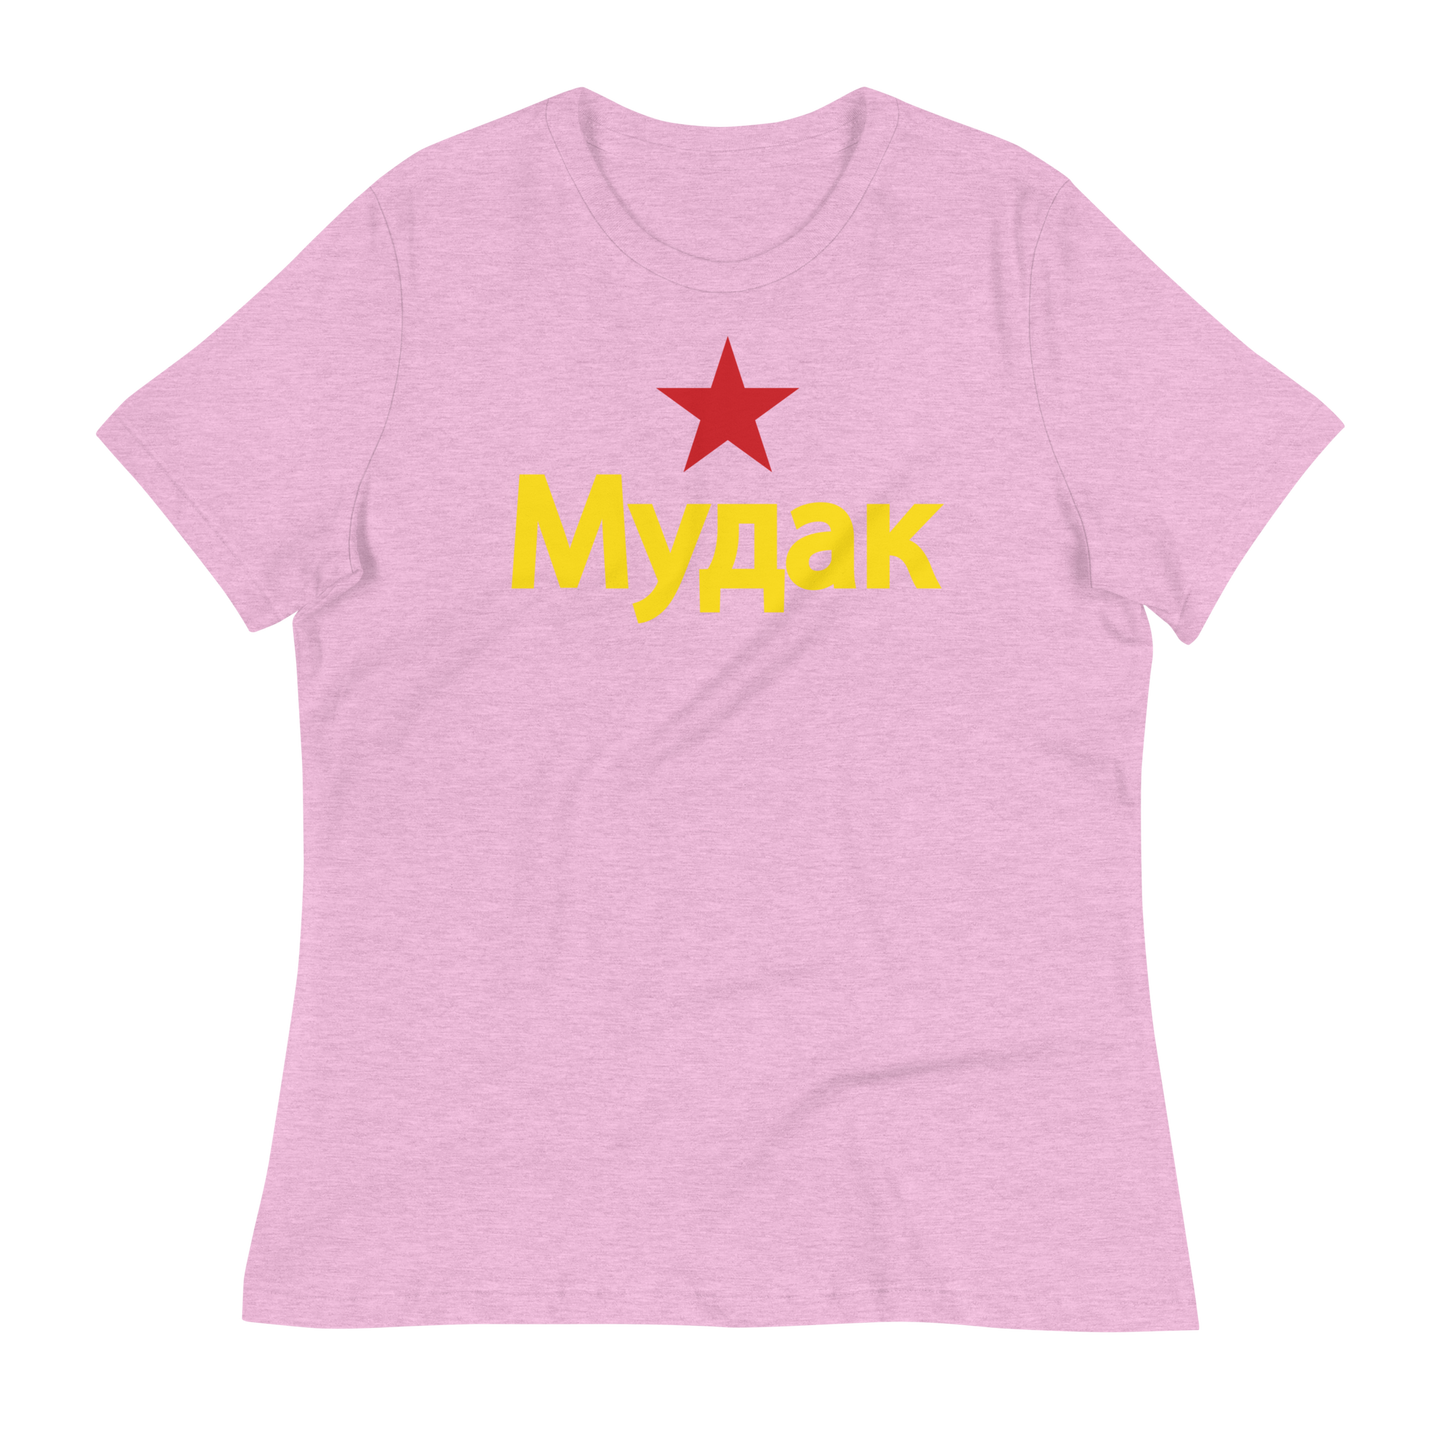 A-Hole "Cyrillic" Women's Relaxed T-Shirt